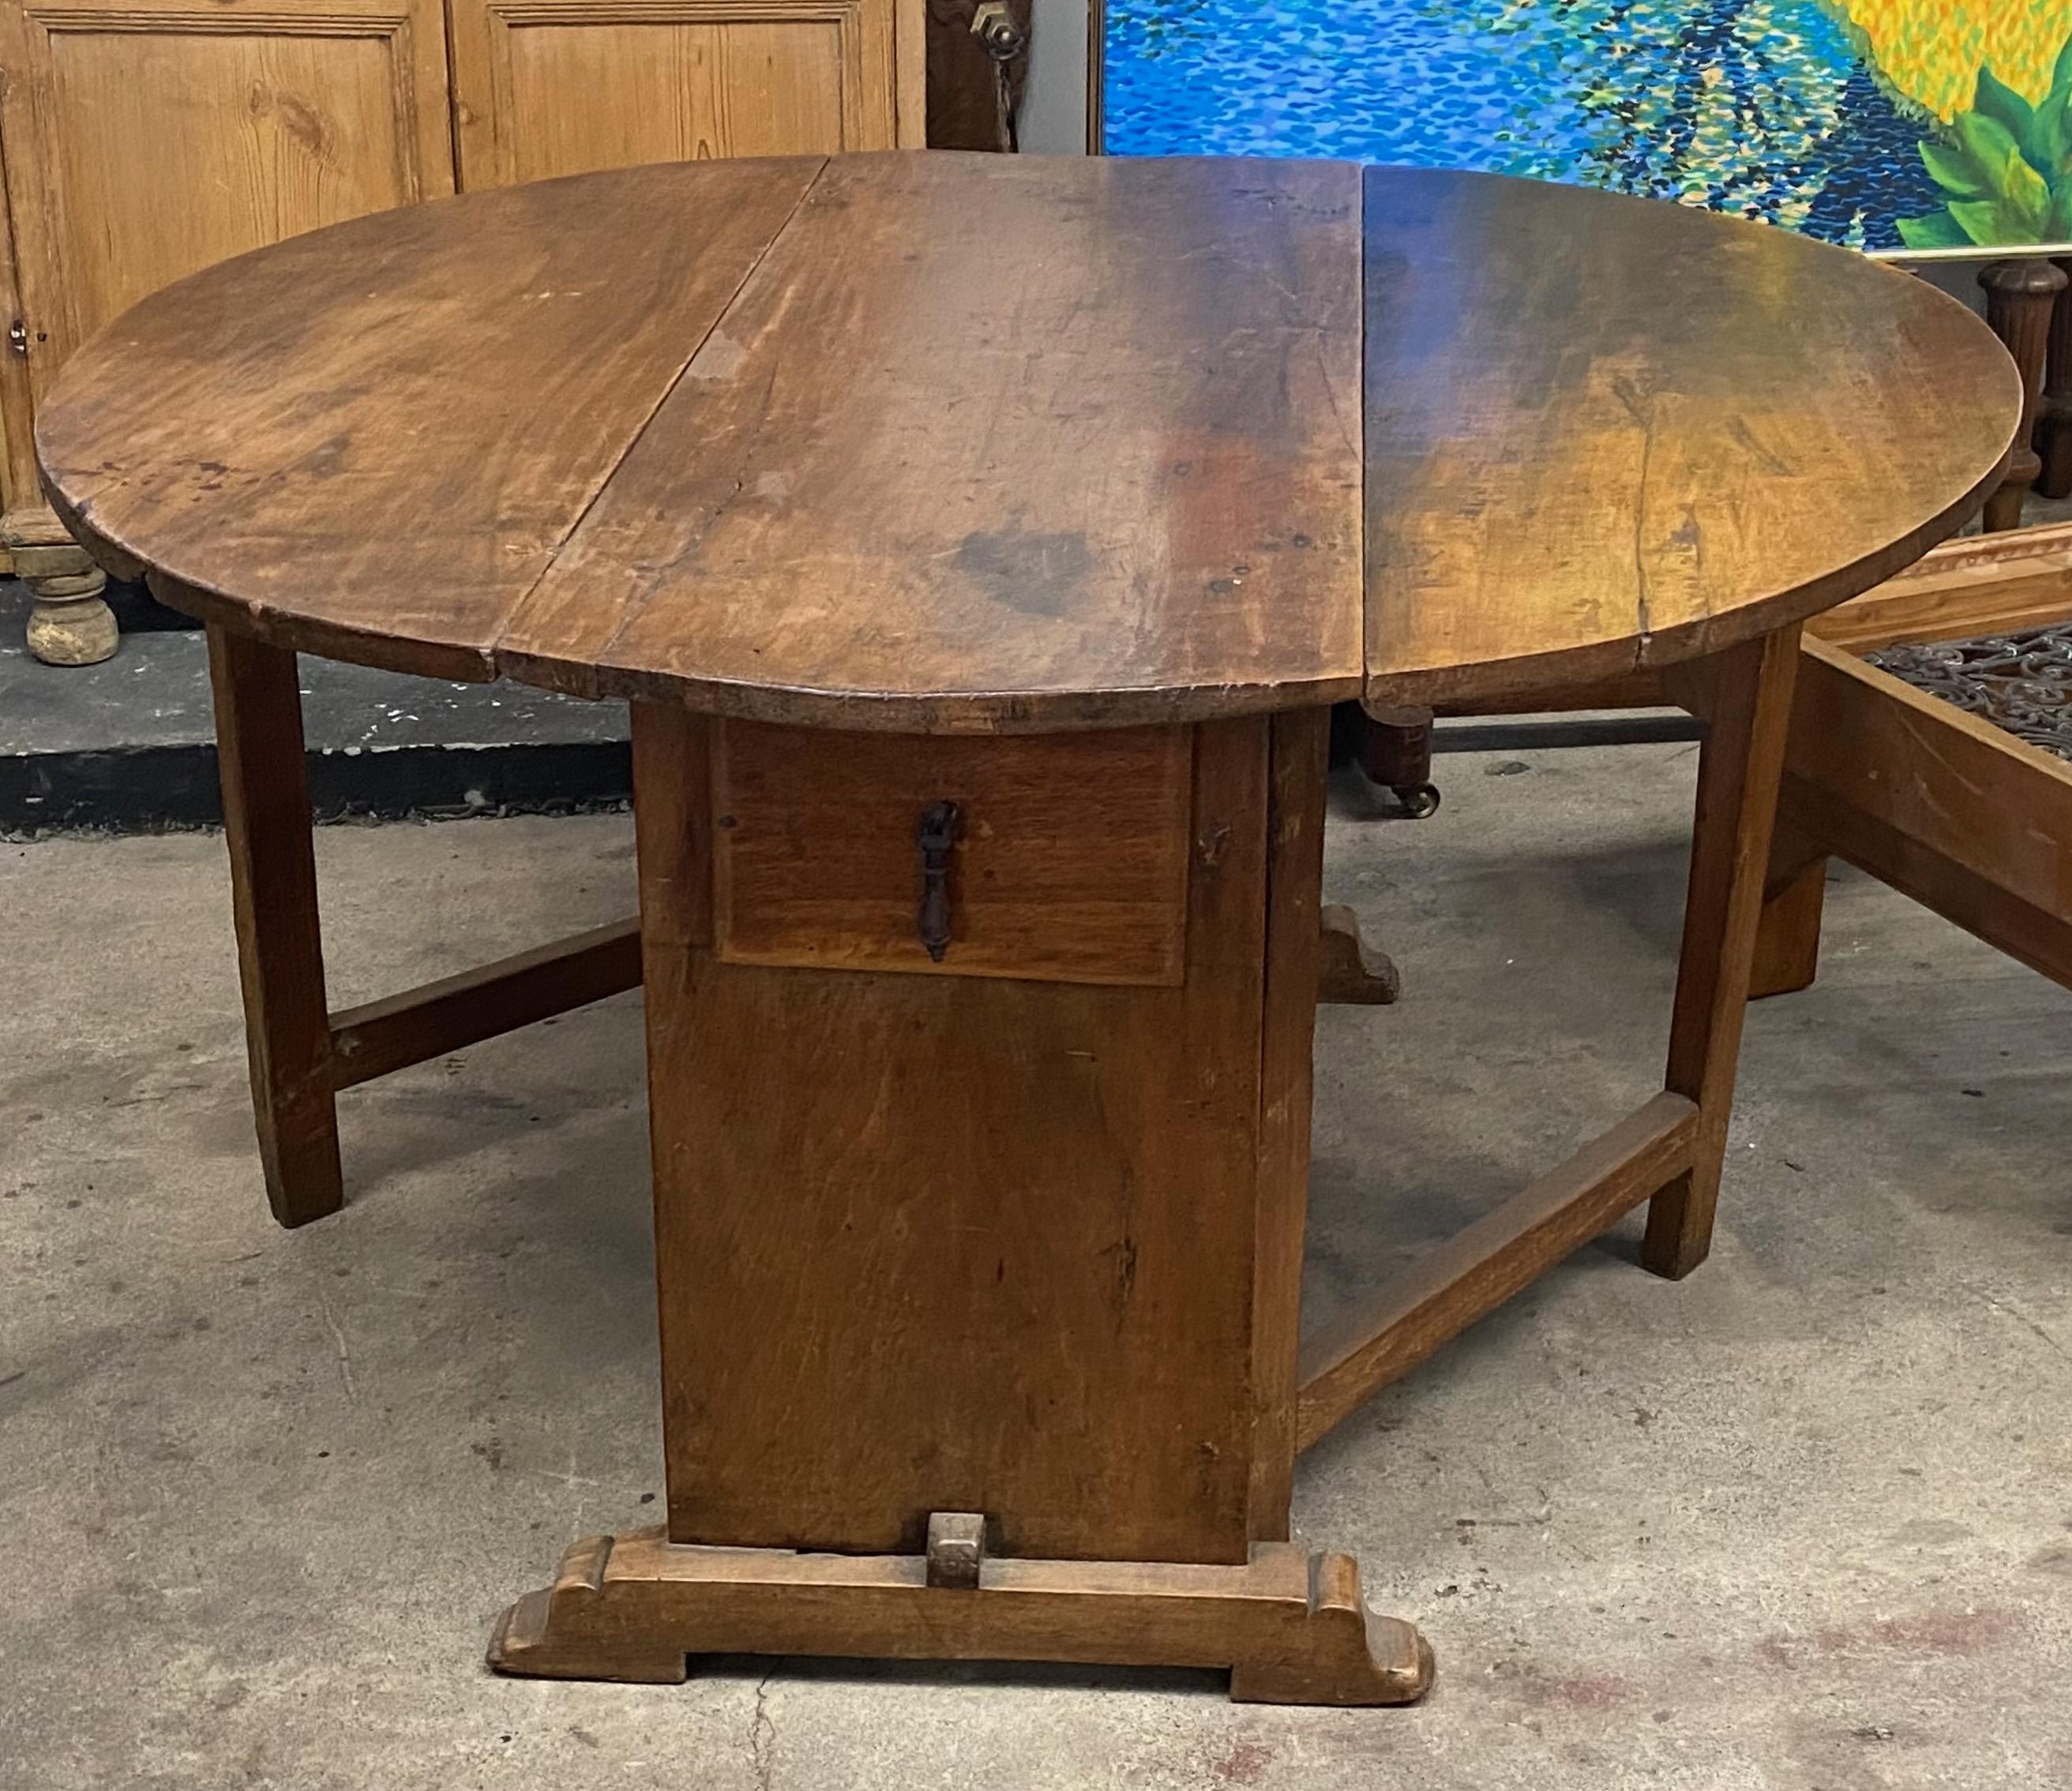 Beautifully aged large solid walnut round drop leaf table.
The gate legs that support the leaves may possibly be old replacements, otherwise in remarkable original condition with original finish.
When the leaves are down the width is 21